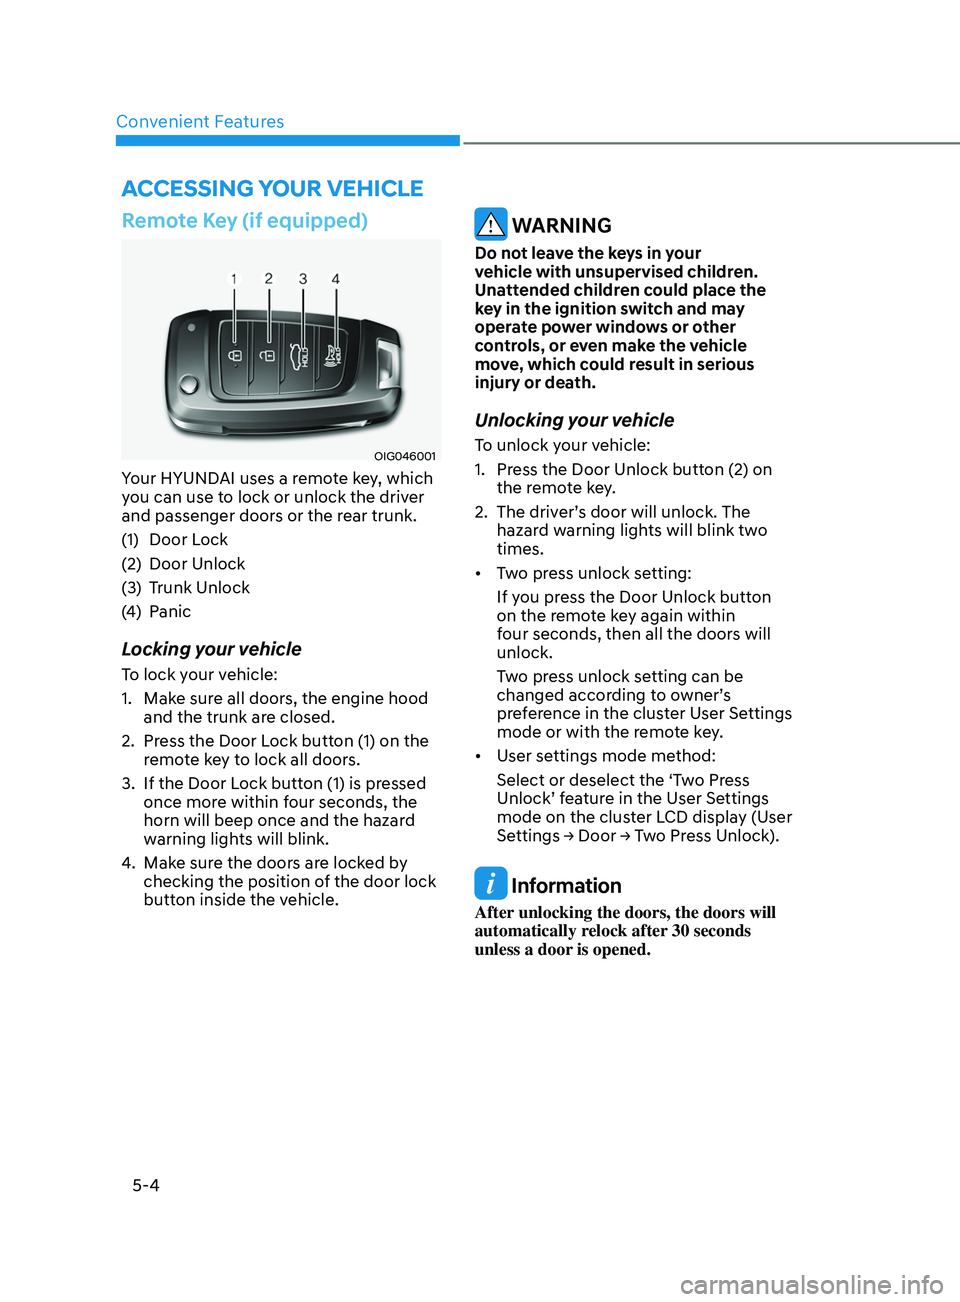 HYUNDAI SONATA 2021  Owners Manual Convenient Features
5-4
Remote Key (if equipped)
OIG046001
Your HYUNDAI uses a remote key, which 
you can use to lock or unlock the driver 
and passenger doors or the rear trunk.
(1) 
Door L
 ock
(2)
